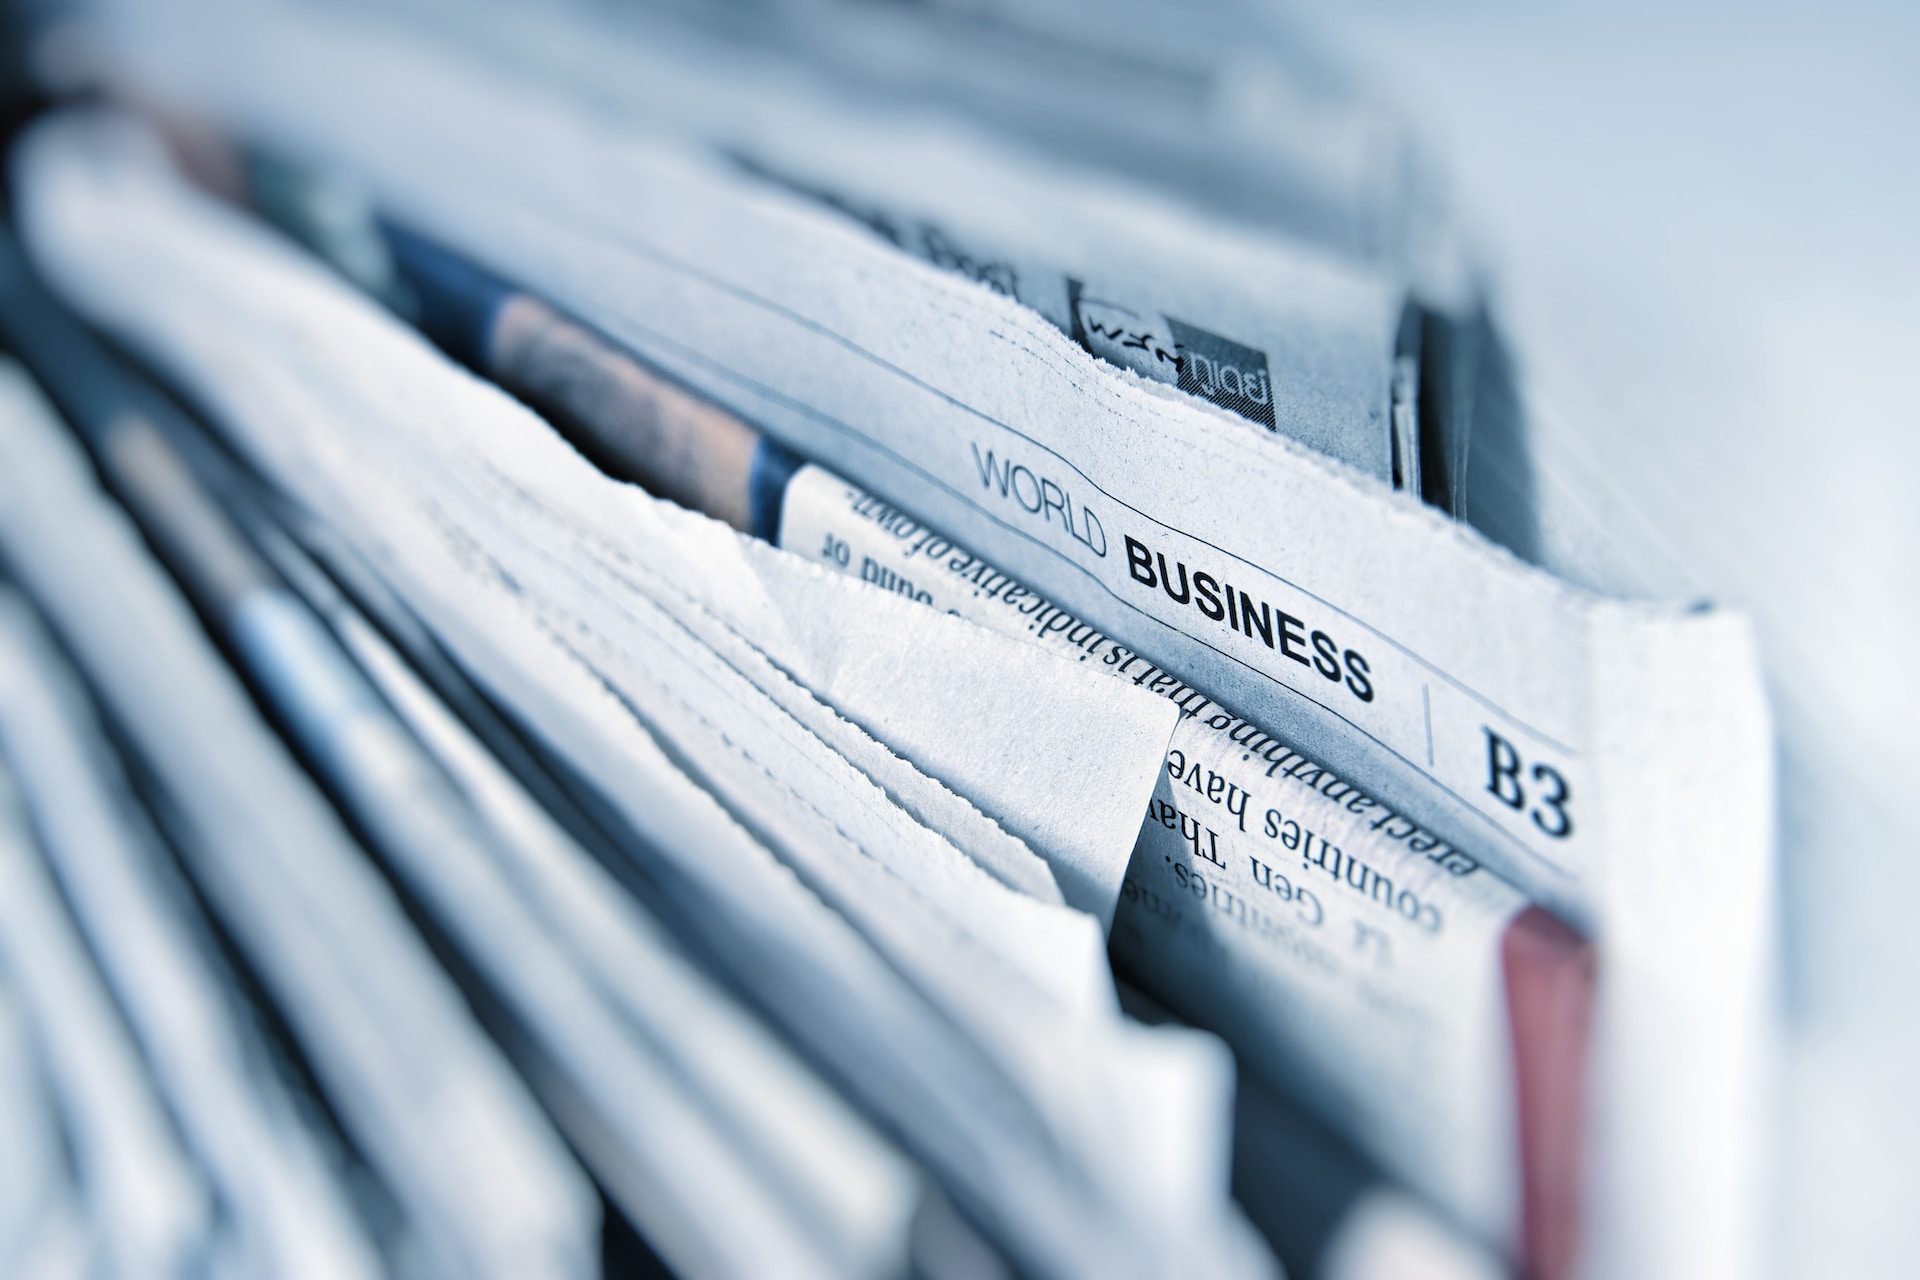 A stack of world business newspapers